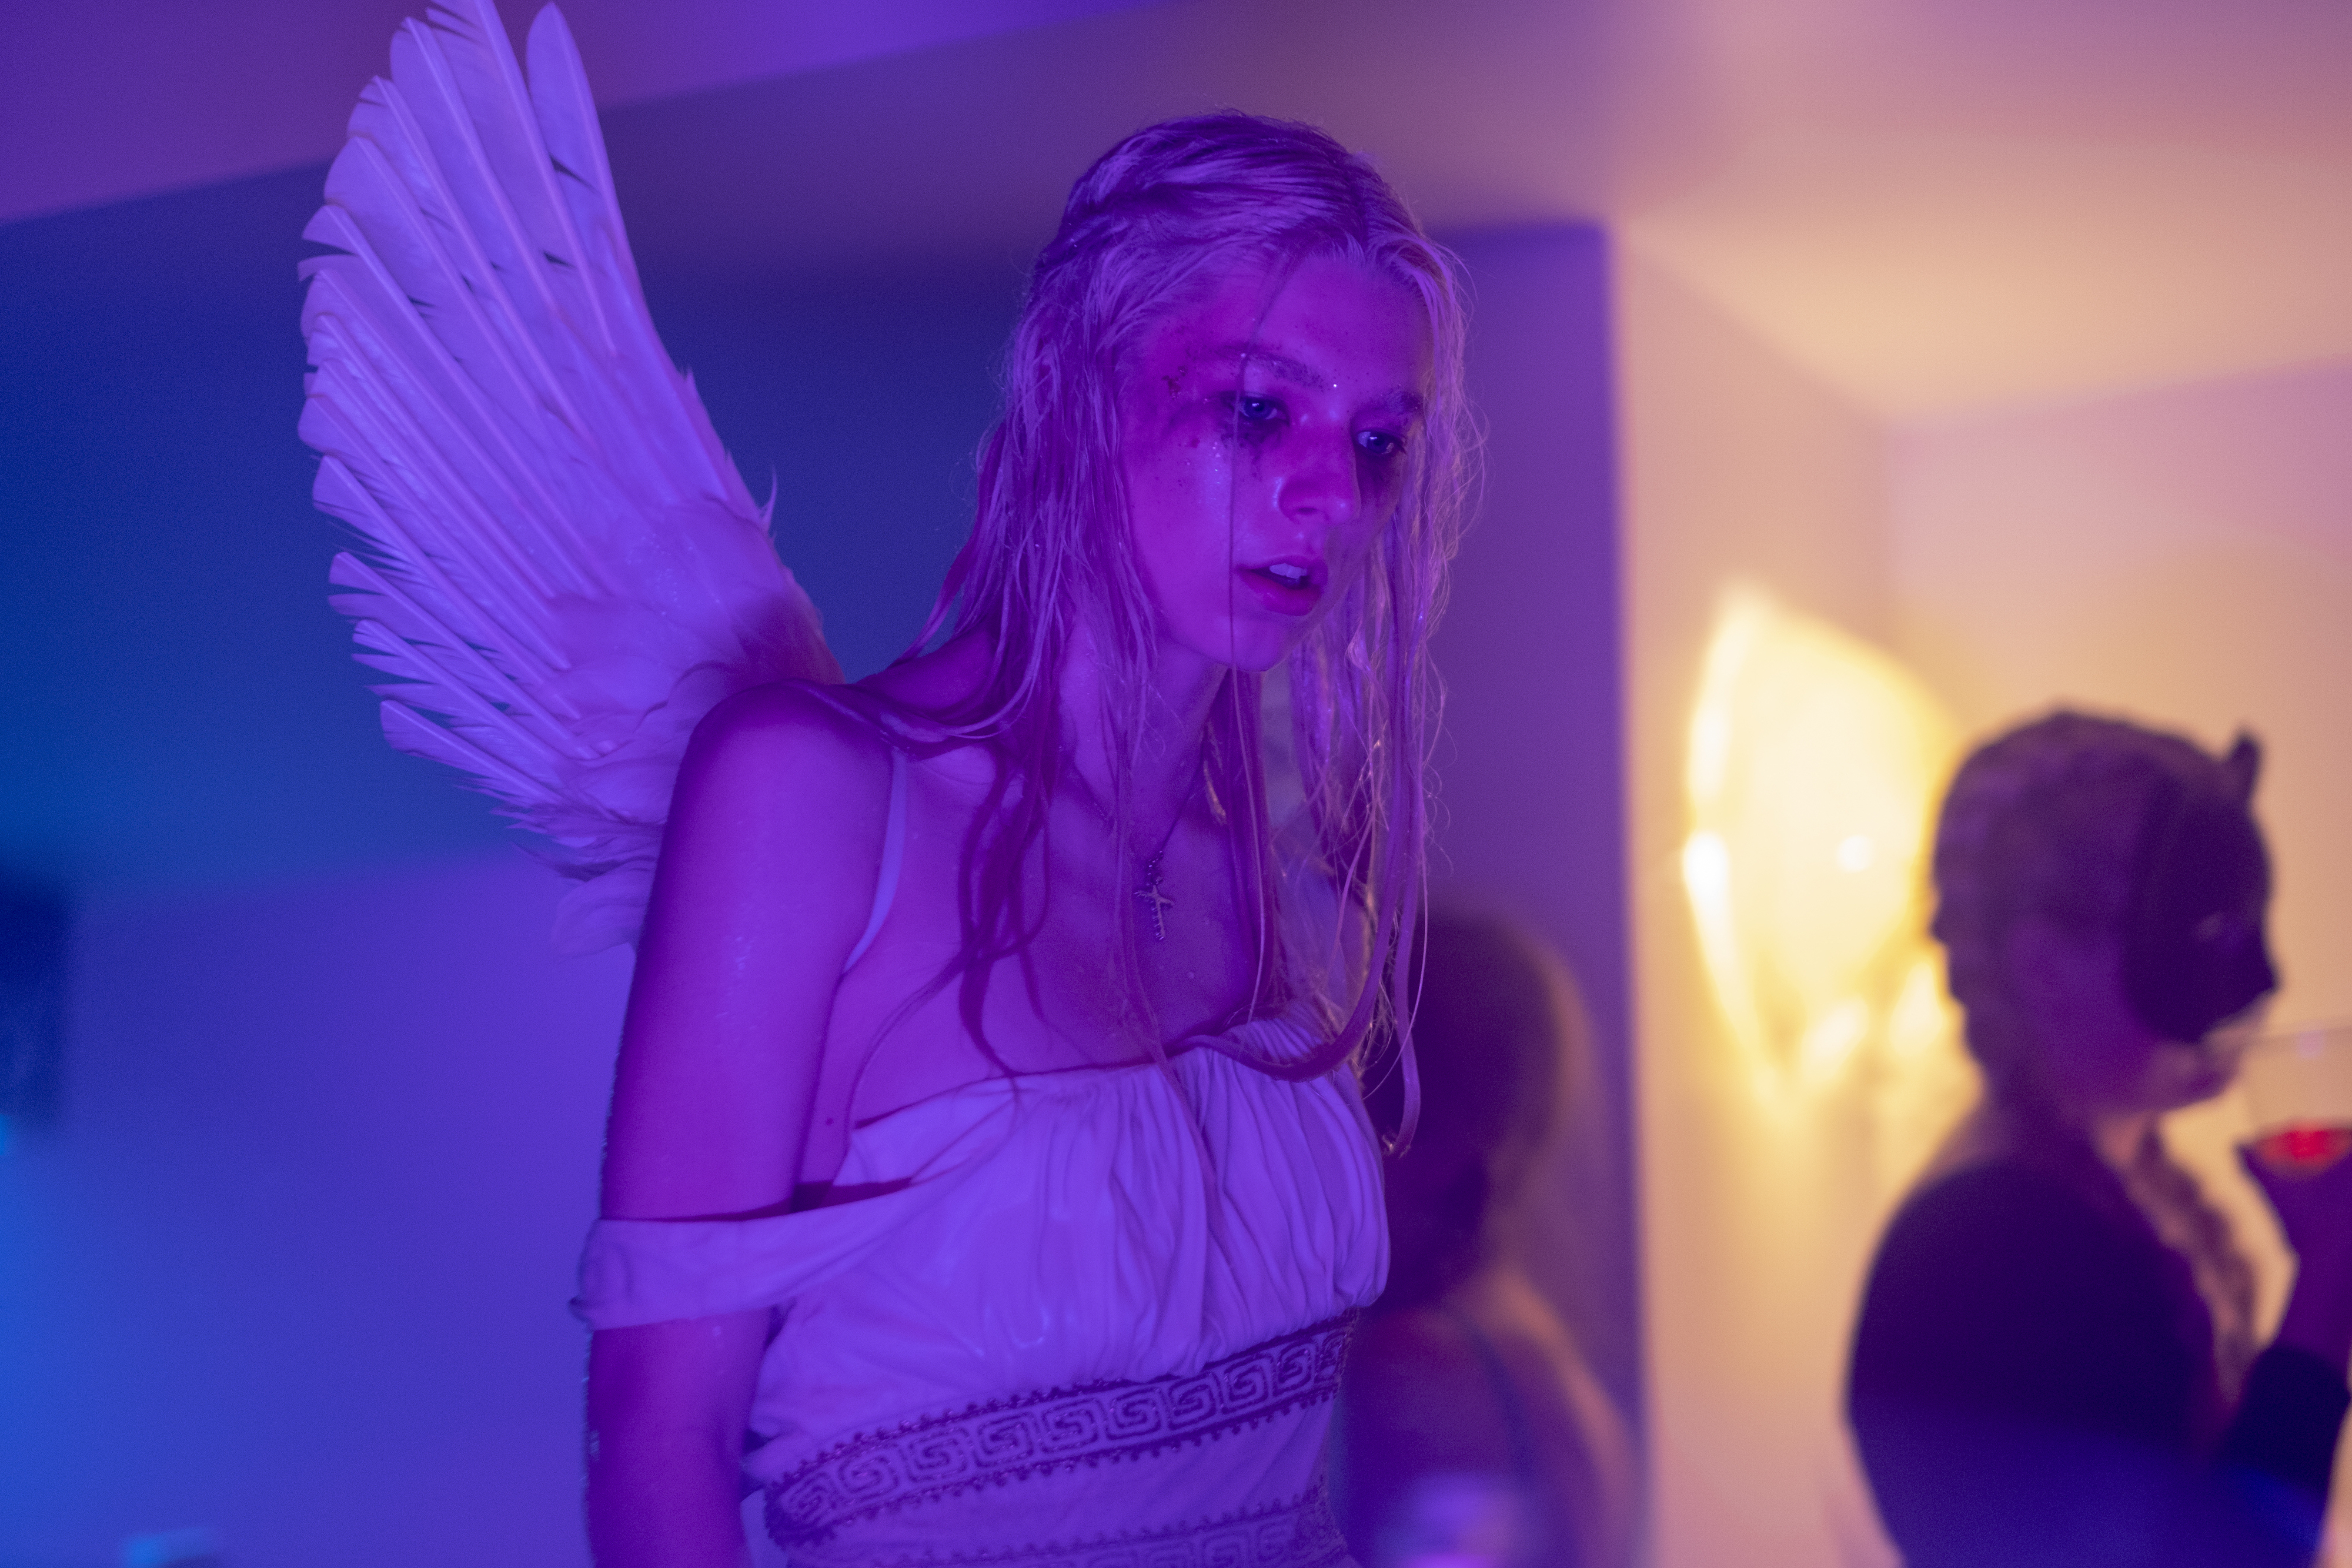 Hunter Schafer as Jules. Photo by Eddy Chen/HBO.